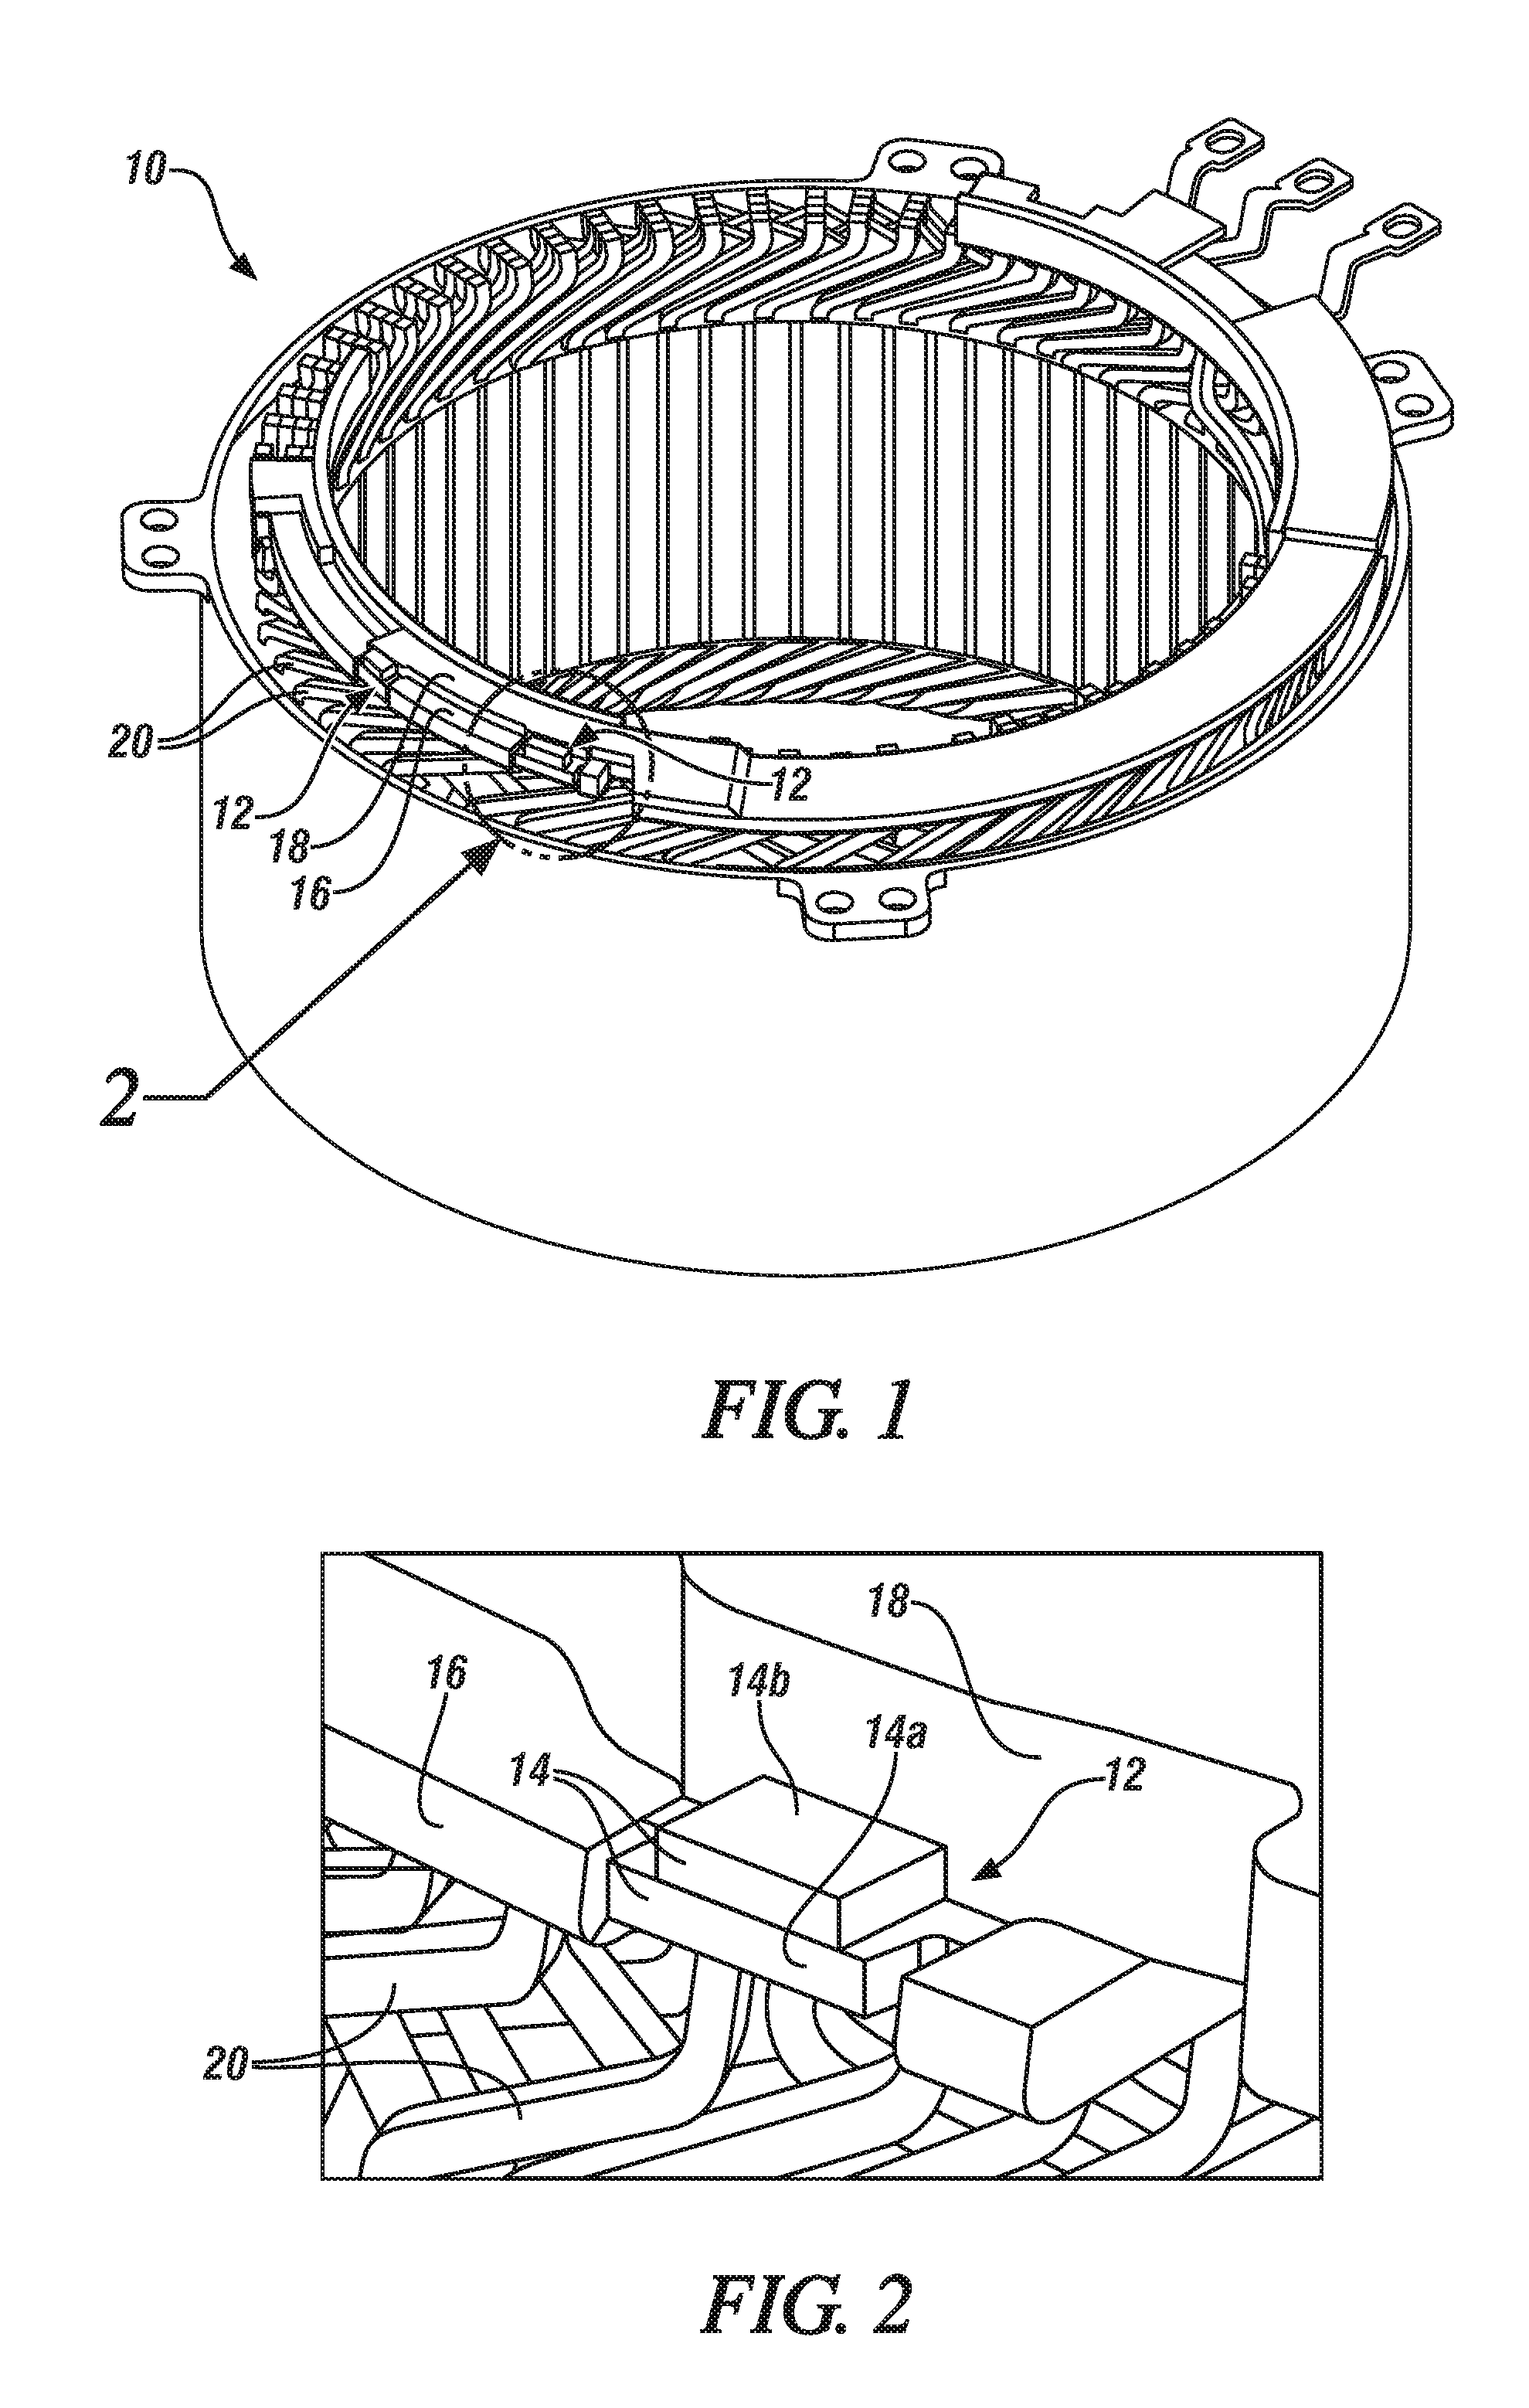 Reaction material pre-placement for reaction metallurgical joining